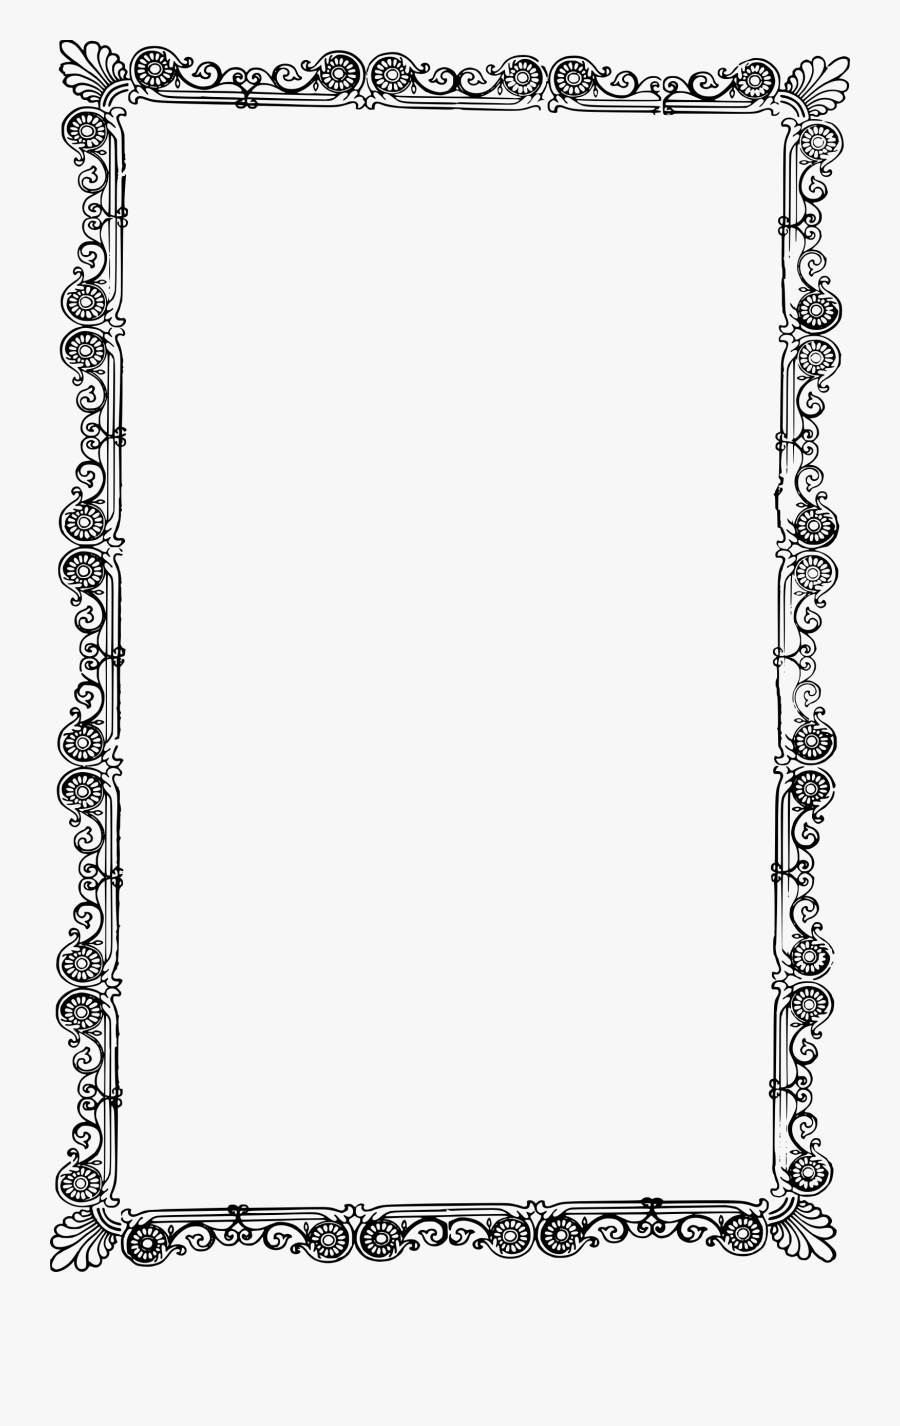 Ticket Clipart Fancy - Old Picture Frame Drawing, Transparent Clipart